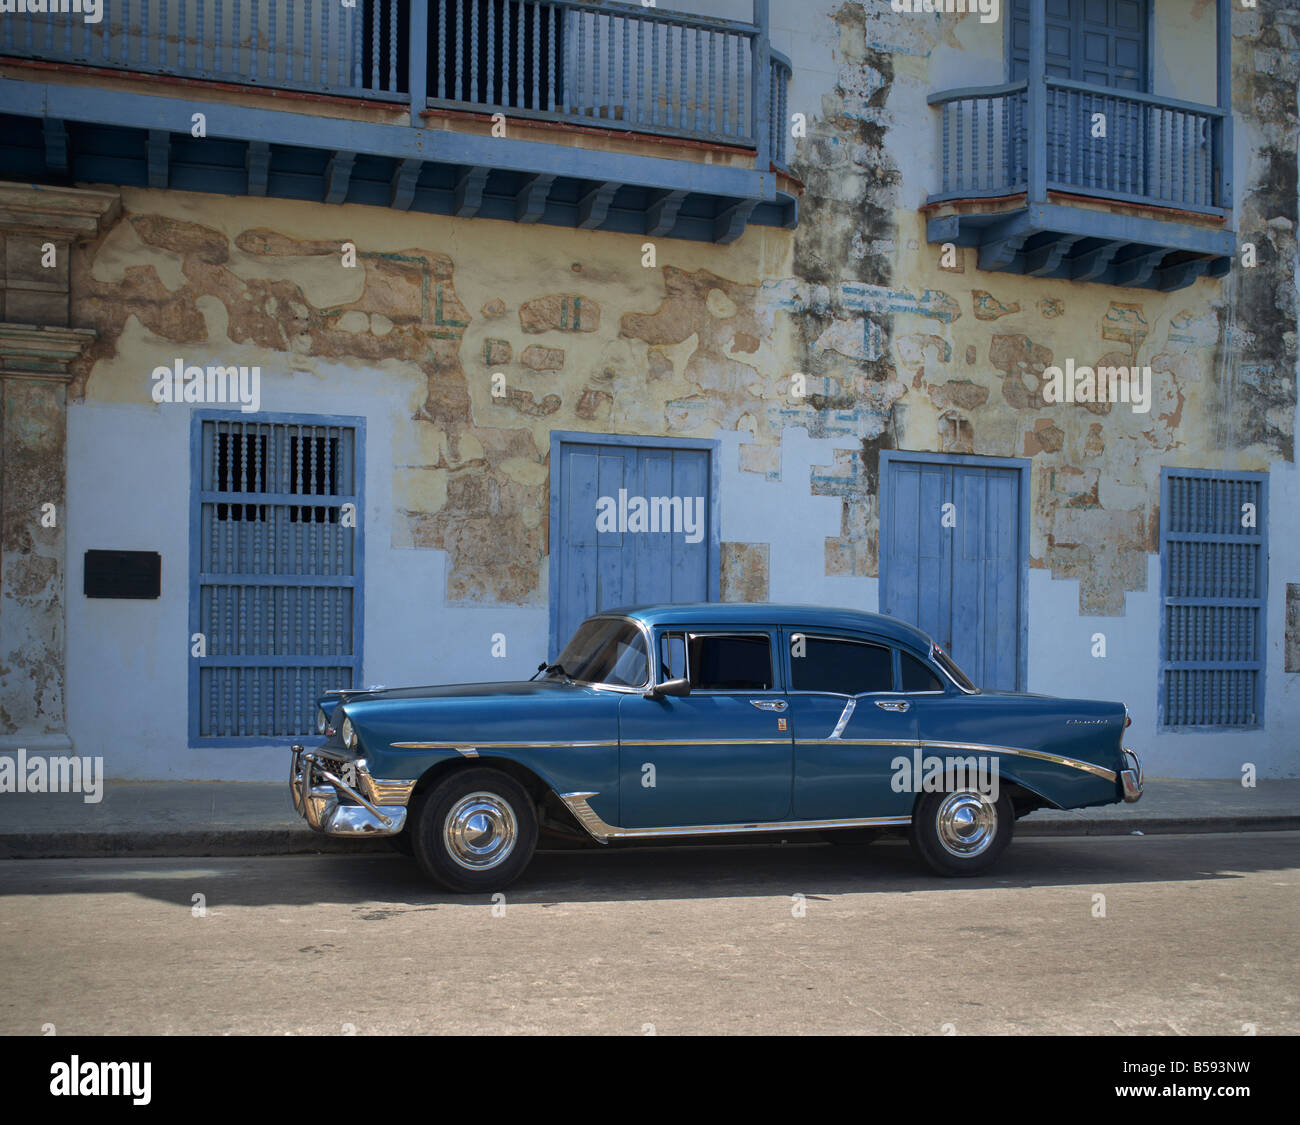 An old blue Chevrolet car parked in a street in Old Havana Cuba West Indies Caribbean Central America Stock Photo